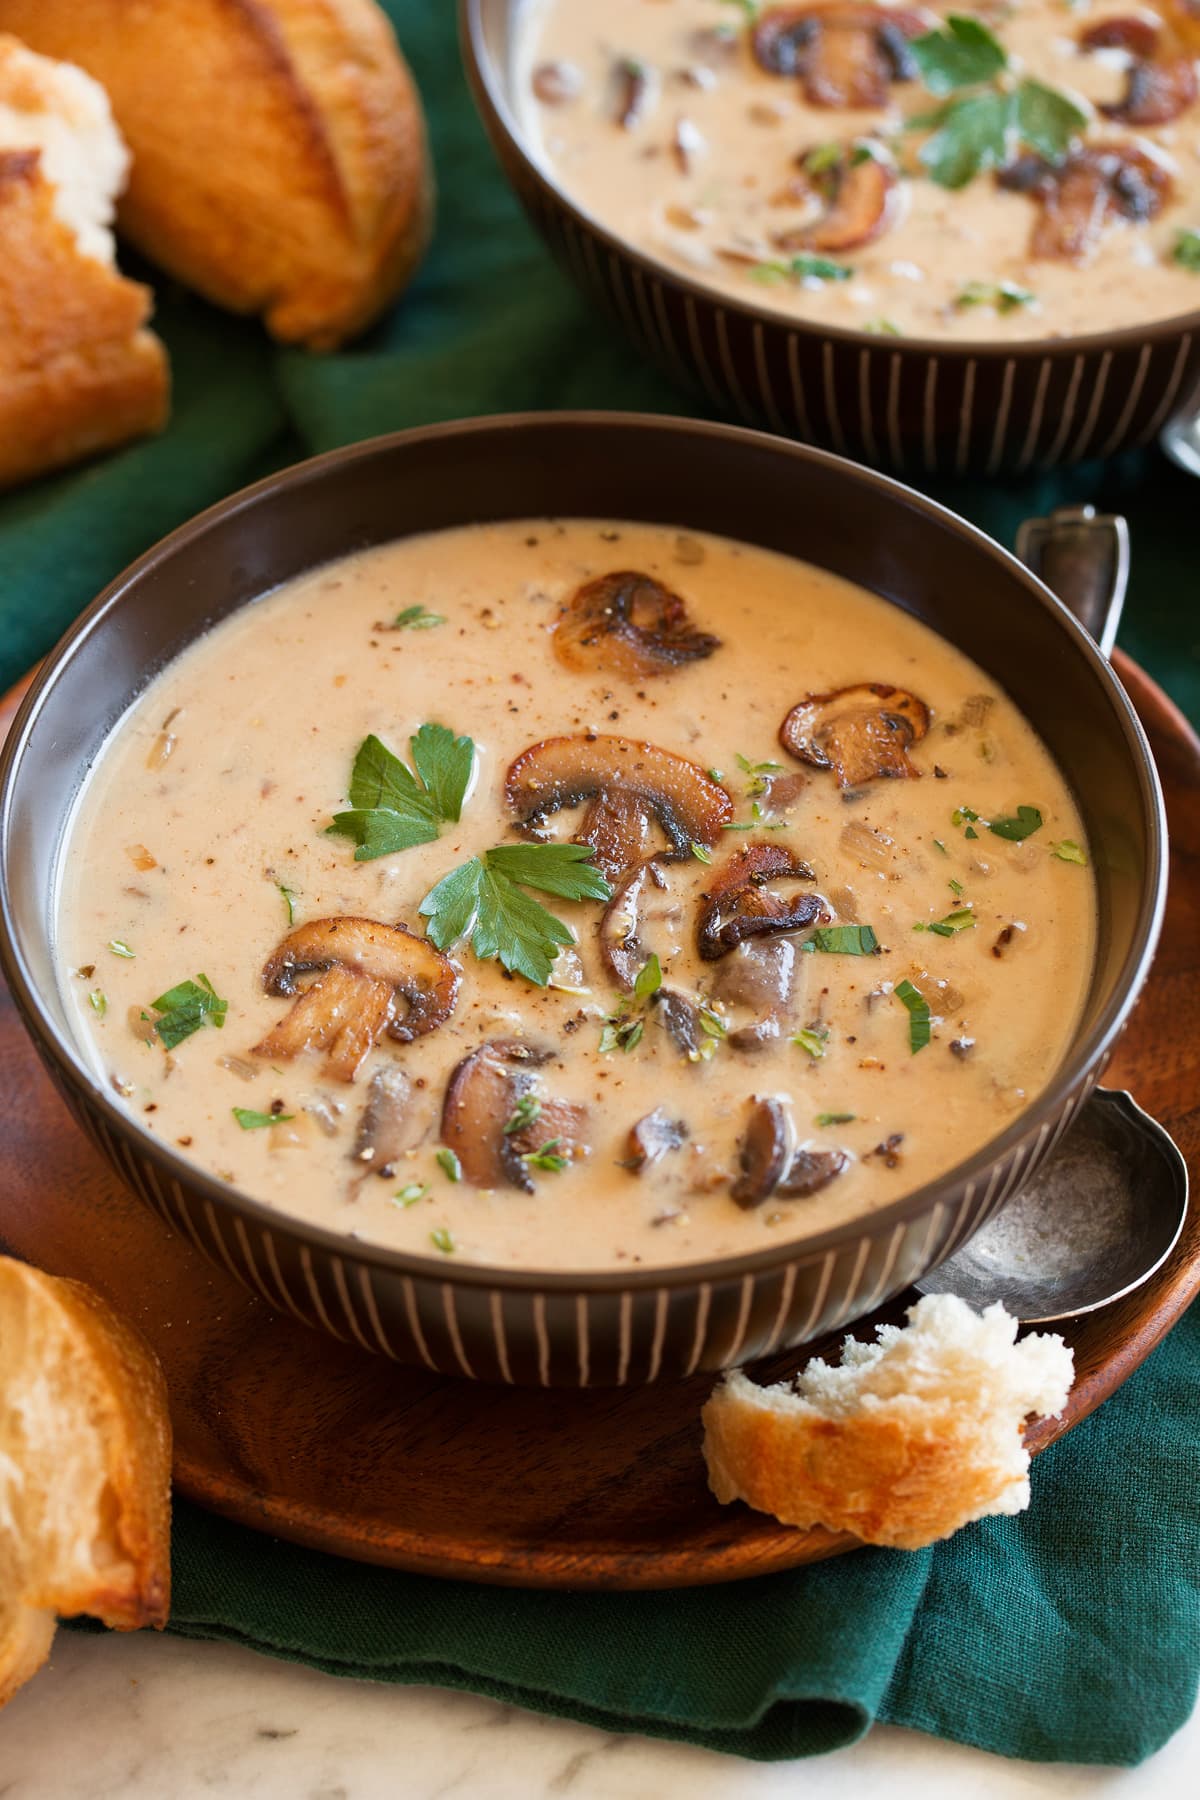 Single serving of cream of mushroom soup in a brown bowl garnished with sauteed mushrooms.